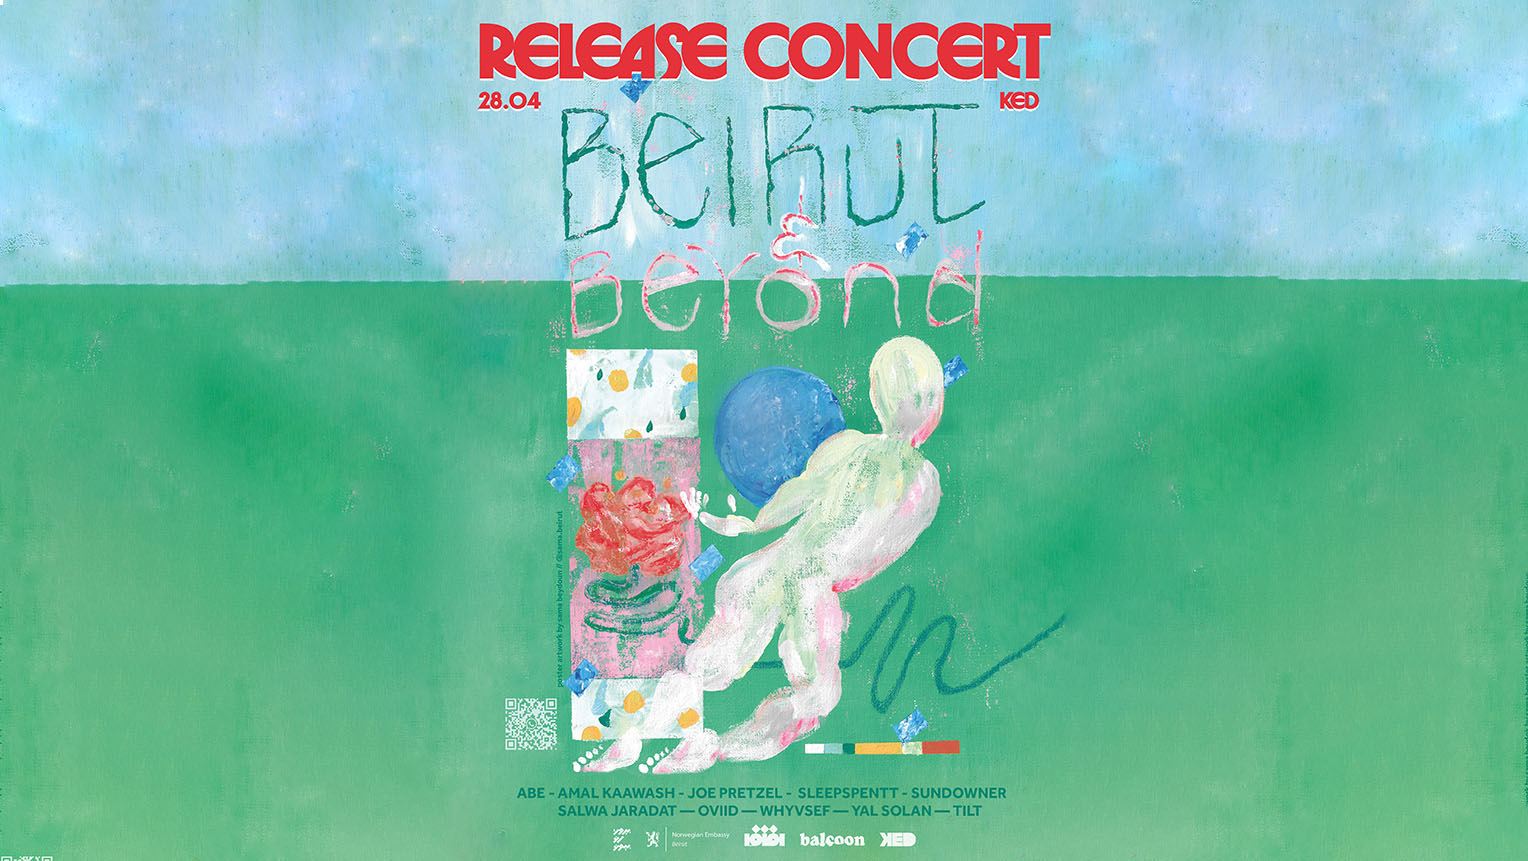 Beirut and Beyond - 10 Years Compilation Release Concert